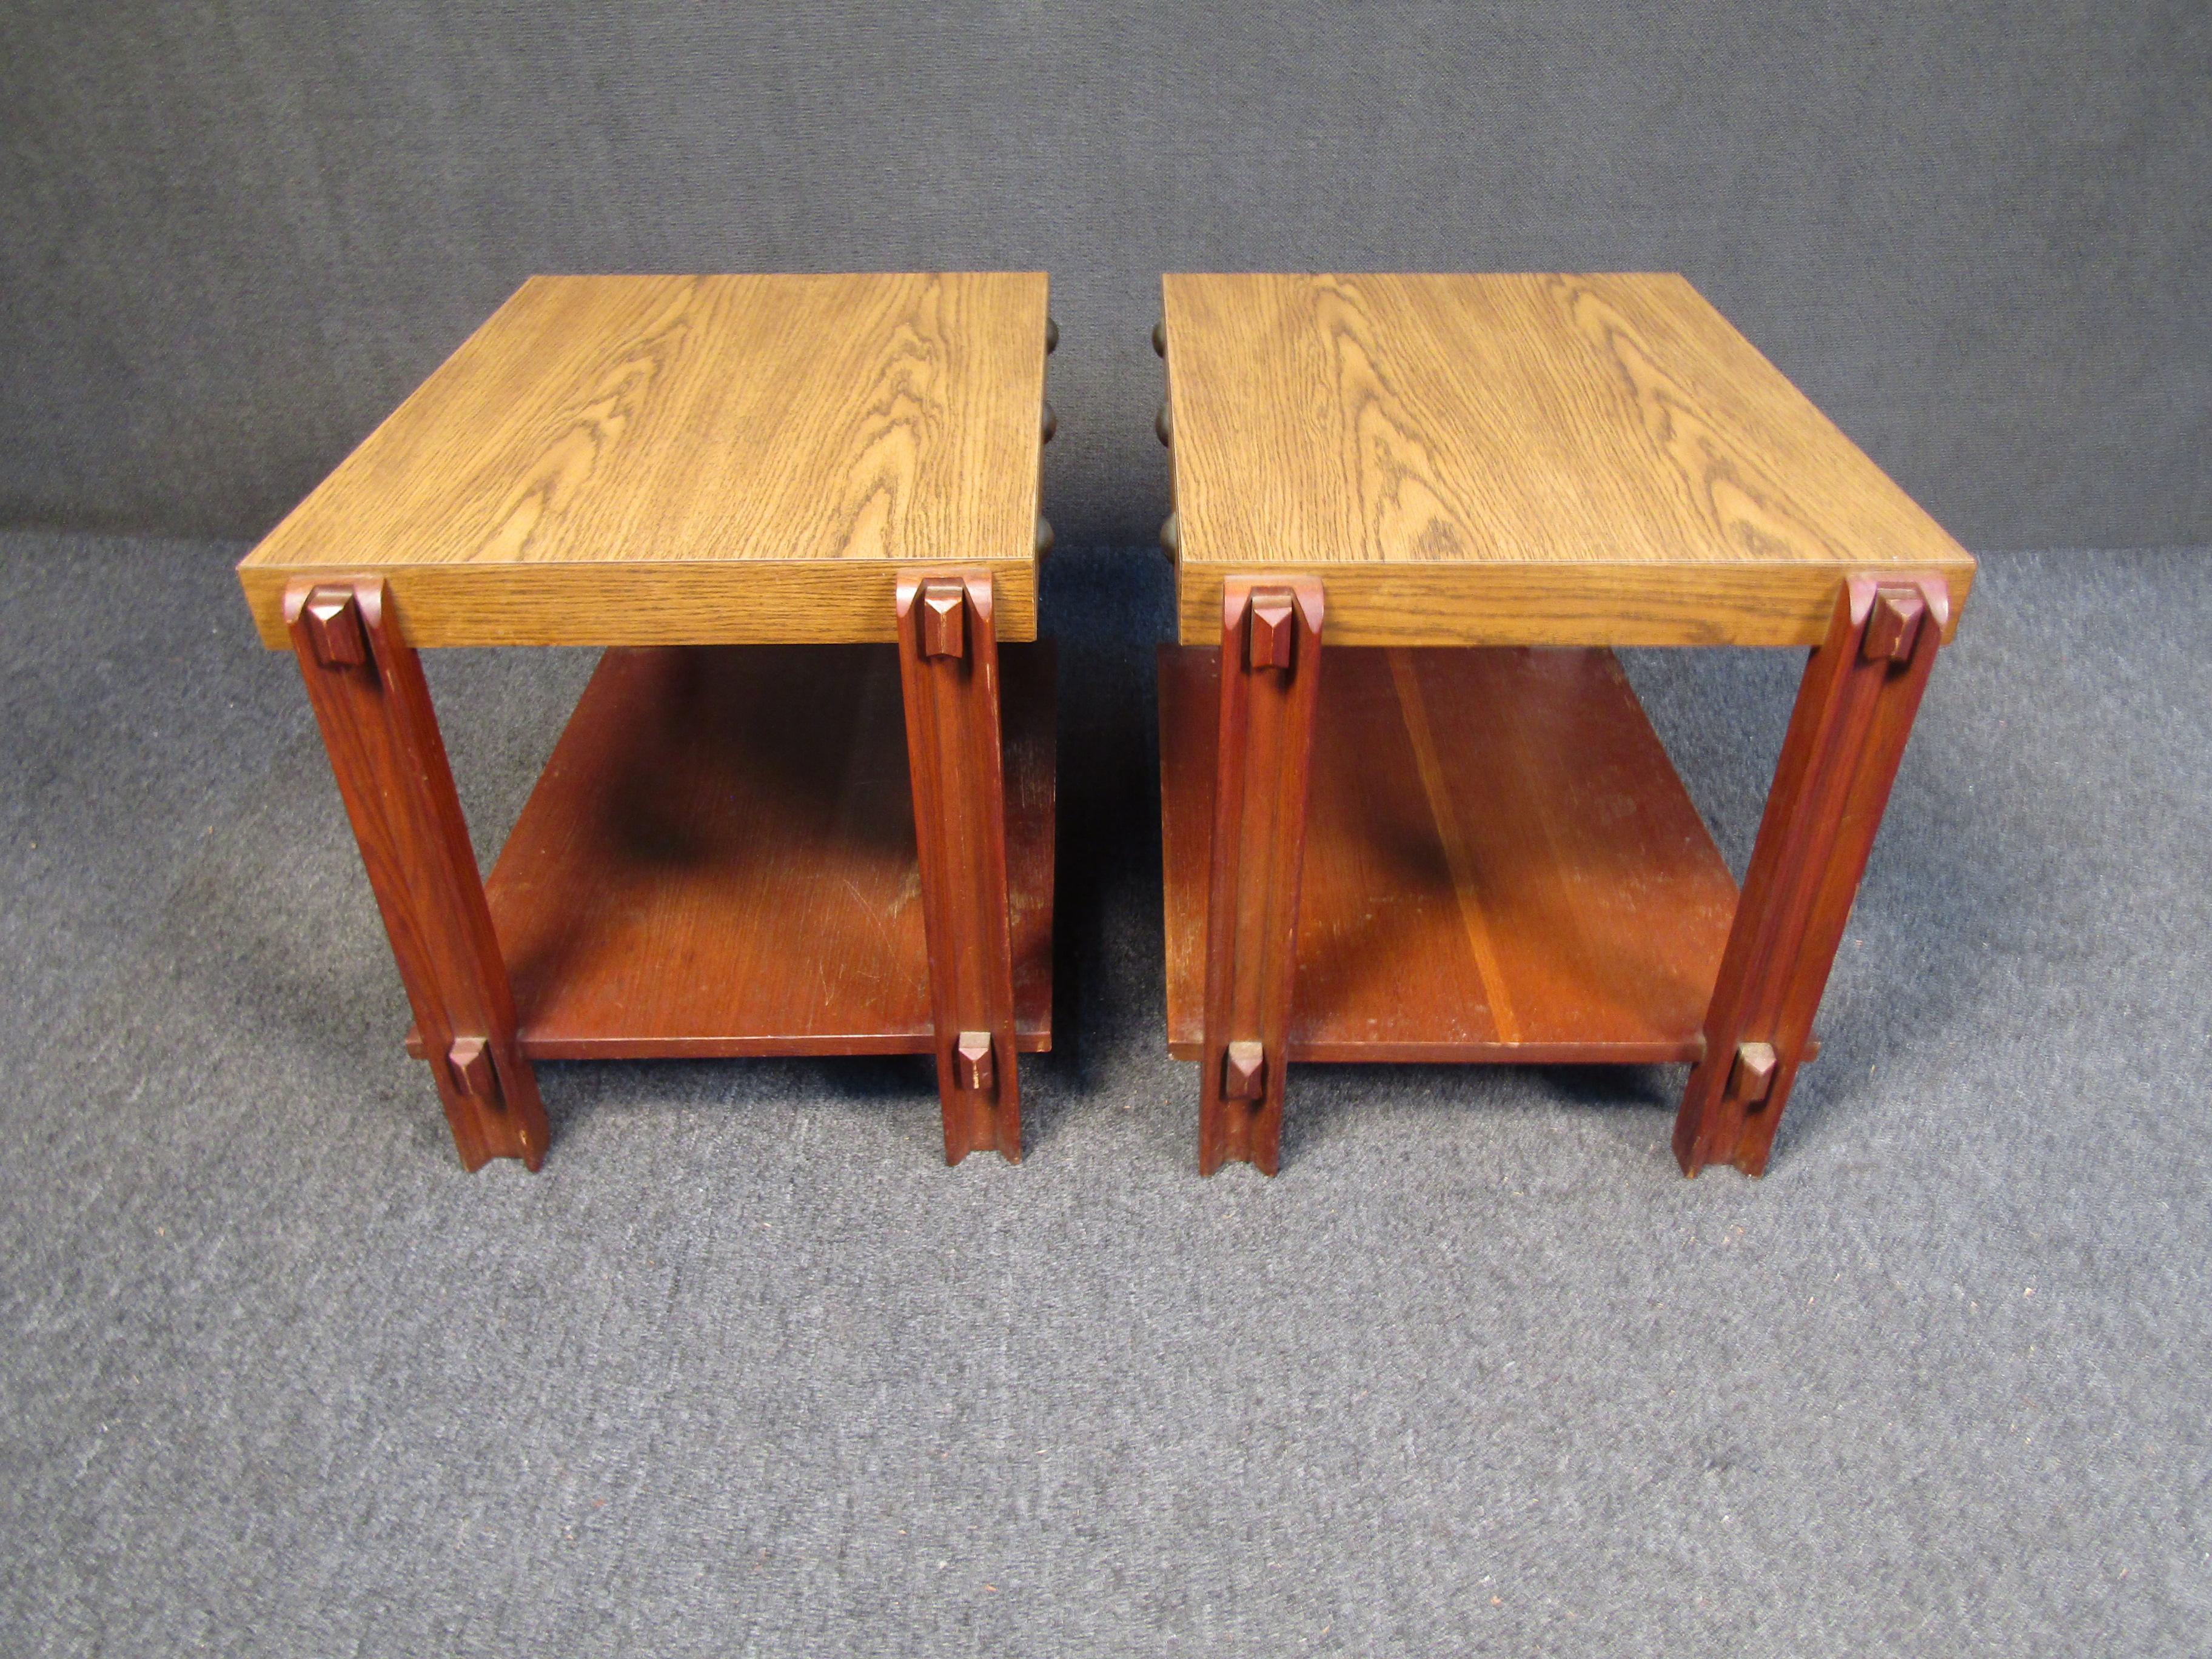 Pair of unique studded two tier end tables comes with a bicolored scheme sure to pop. These pieces are made of veneer and stand at 21 inches high. Please confirm item location (NJ or NY).